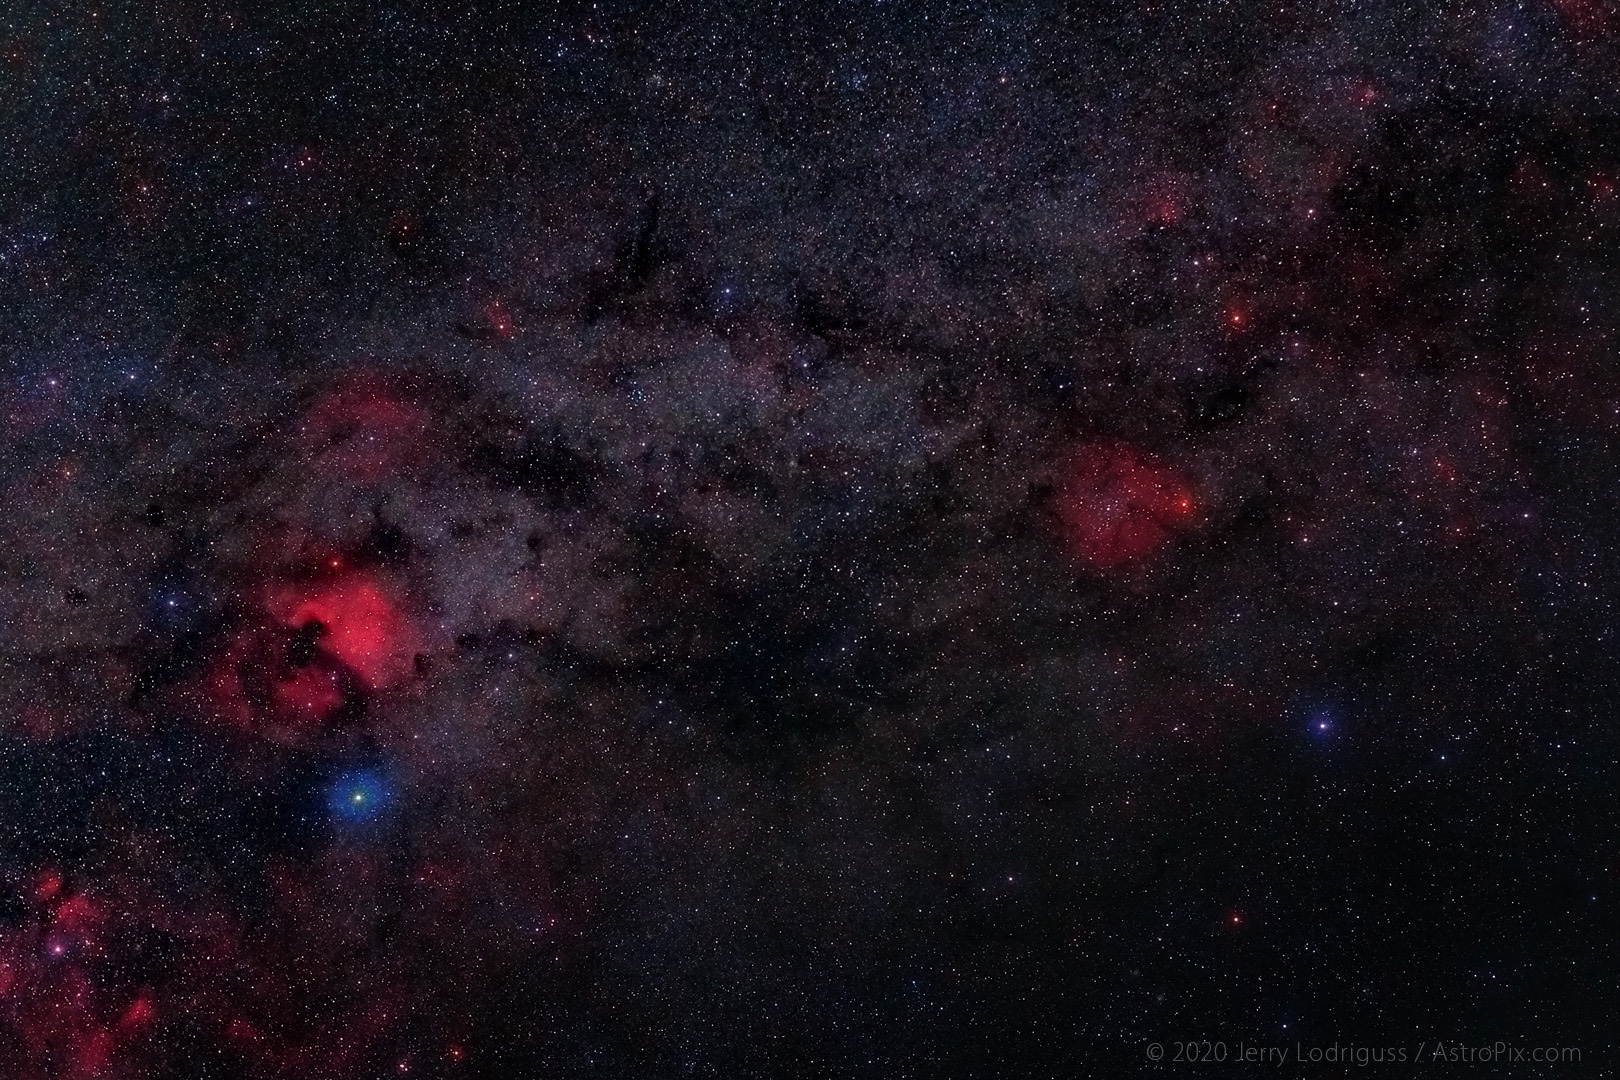 The shadowy filaments of Le Gentil 3, a very large dark nebula complex, fill the area of sky in the center of the frame between Deneb and the North America Nebula in Cygnus at left and Herschel's Garnet Star and IC 1396 in Cepheus at right. <br /><br />Le Gentil 3 is named after the French observer Guillaume-Joseph-Hyacinthe-Jean-Baptiste Le Gentil de la Galaziere, who observed and cataloged it in the 1700s.